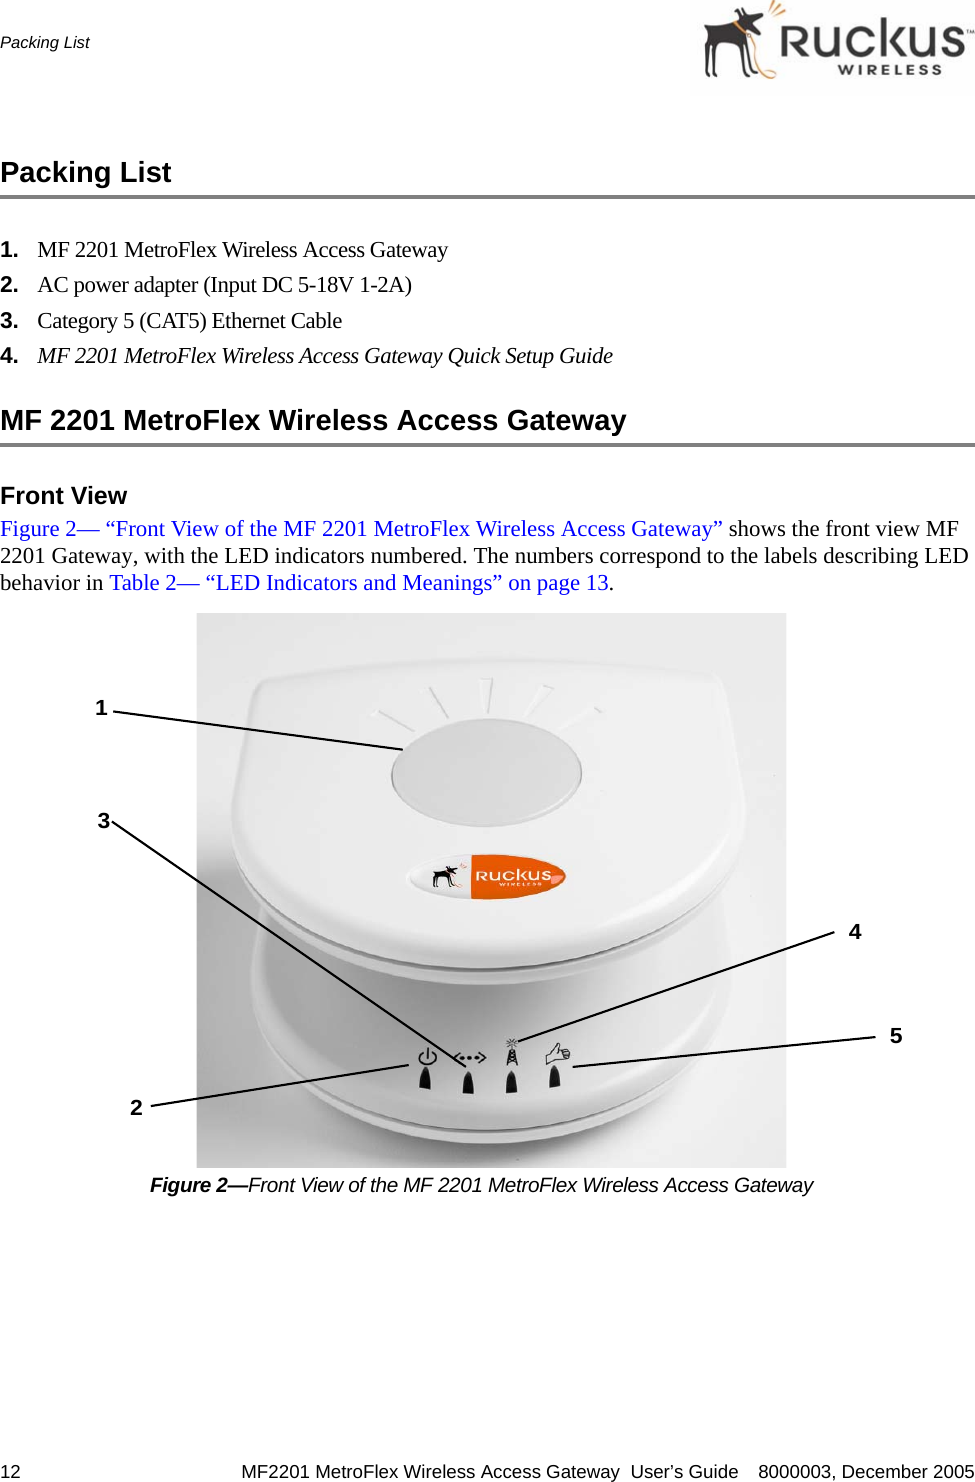 12  MF2201 MetroFlex Wireless Access Gateway  User’s Guide 8000003, December 2005Packing ListPacking List1. MF 2201 MetroFlex Wireless Access Gateway2. AC power adapter (Input DC 5-18V 1-2A)3. Category 5 (CAT5) Ethernet Cable4. MF 2201 MetroFlex Wireless Access Gateway Quick Setup GuideMF 2201 MetroFlex Wireless Access GatewayFront ViewFigure 2— “Front View of the MF 2201 MetroFlex Wireless Access Gateway” shows the front view MF 2201 Gateway, with the LED indicators numbered. The numbers correspond to the labels describing LED behavior in Table 2— “LED Indicators and Meanings” on page 13.Figure 2—Front View of the MF 2201 MetroFlex Wireless Access Gateway12345